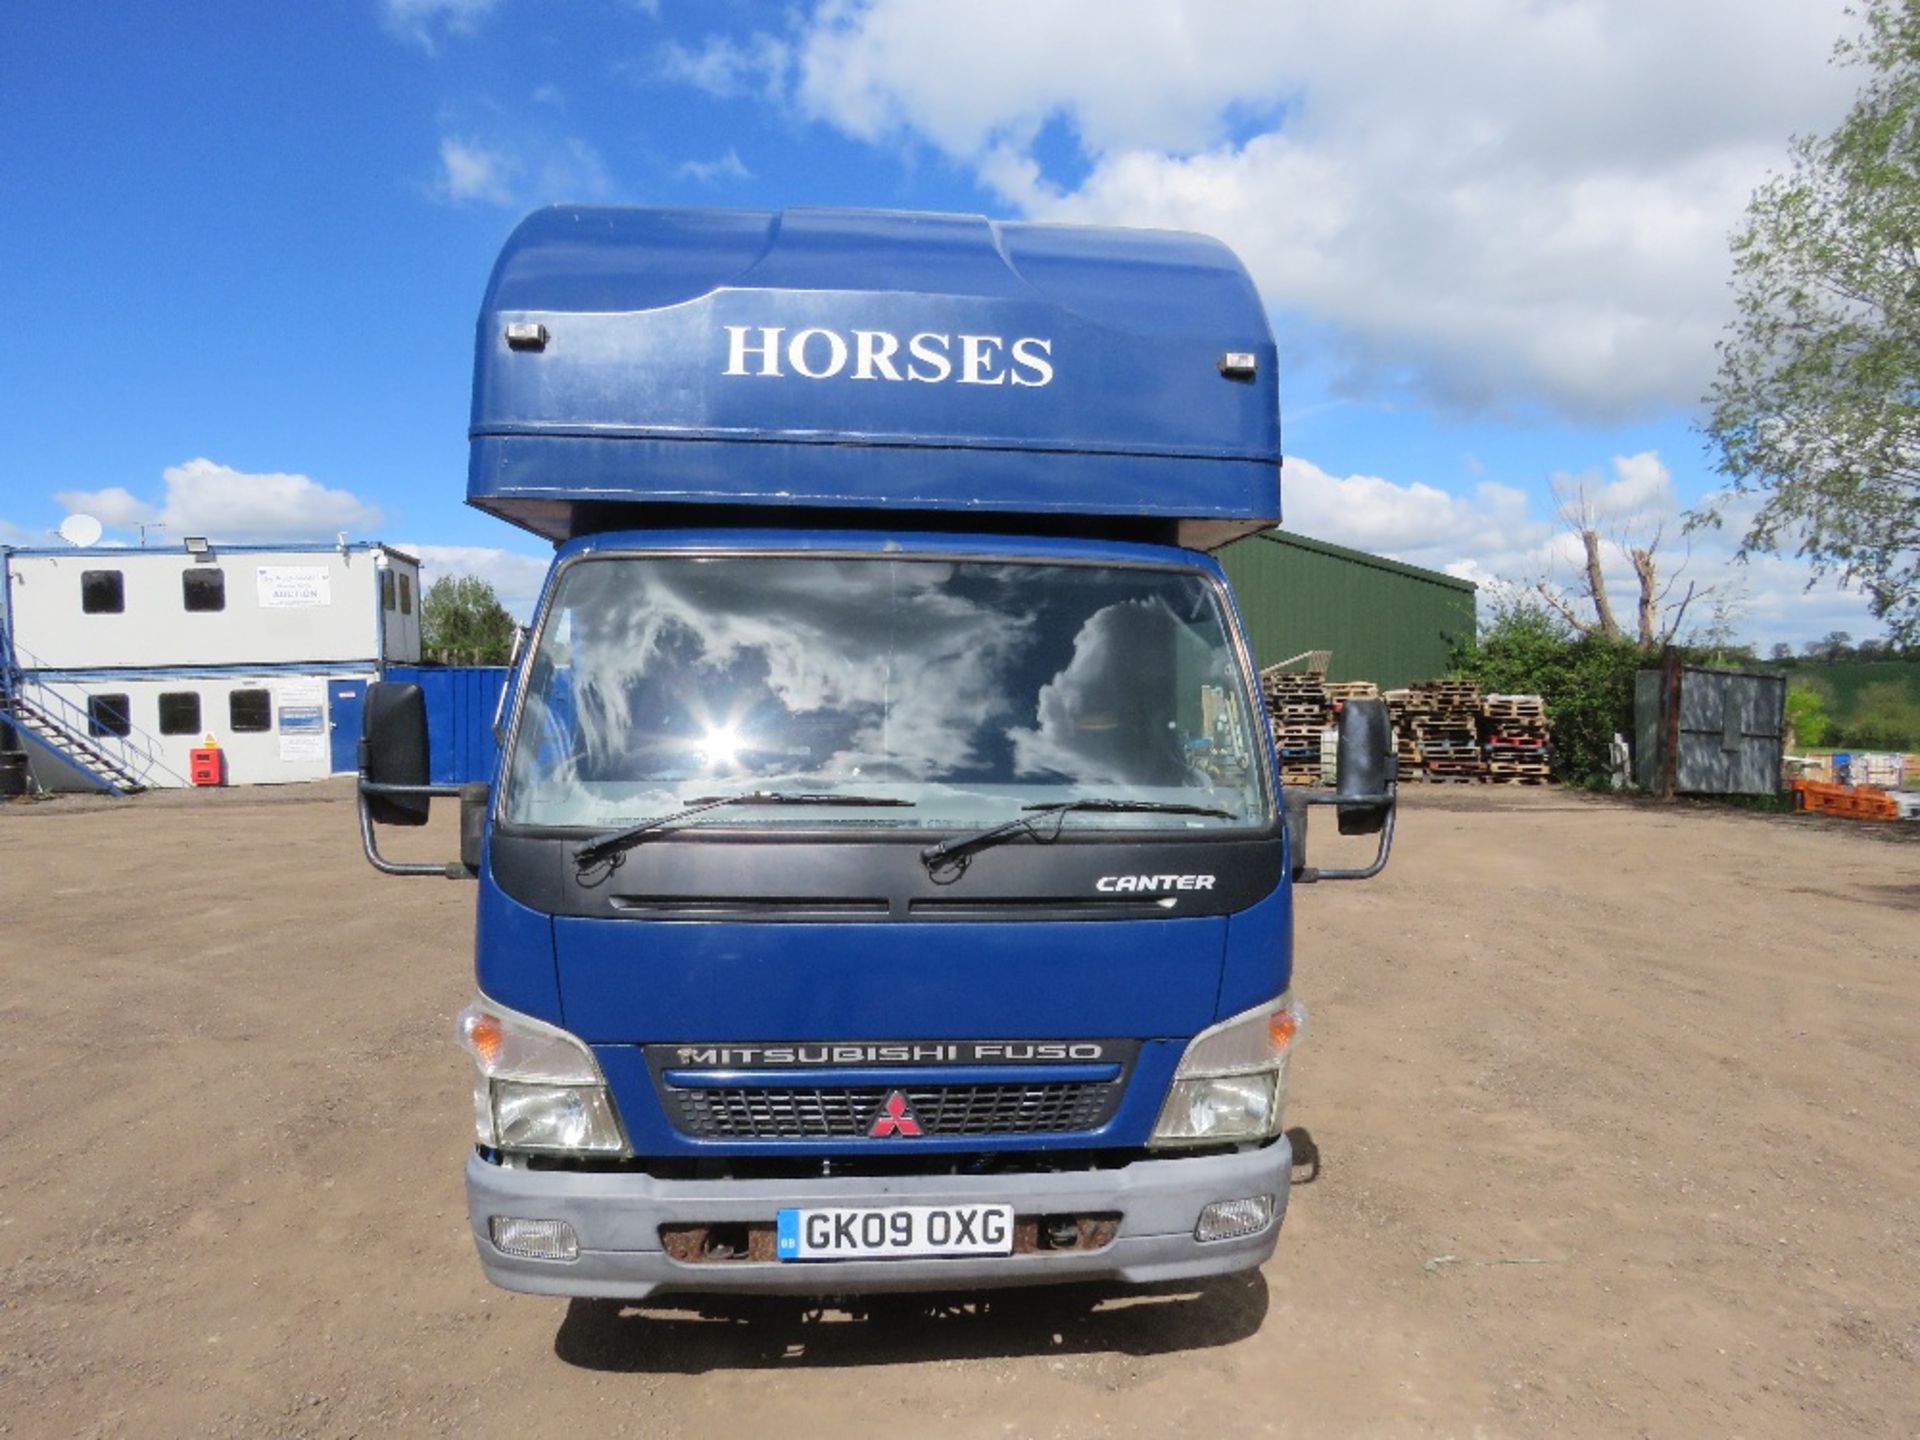 MITSUBISHI CANTER HORSE BOX LORRY REG:GK09 OXG. V5 AND PLATING CERTIFICATE IN OFFICE. MOT EXPIRED. - Bild 3 aus 24